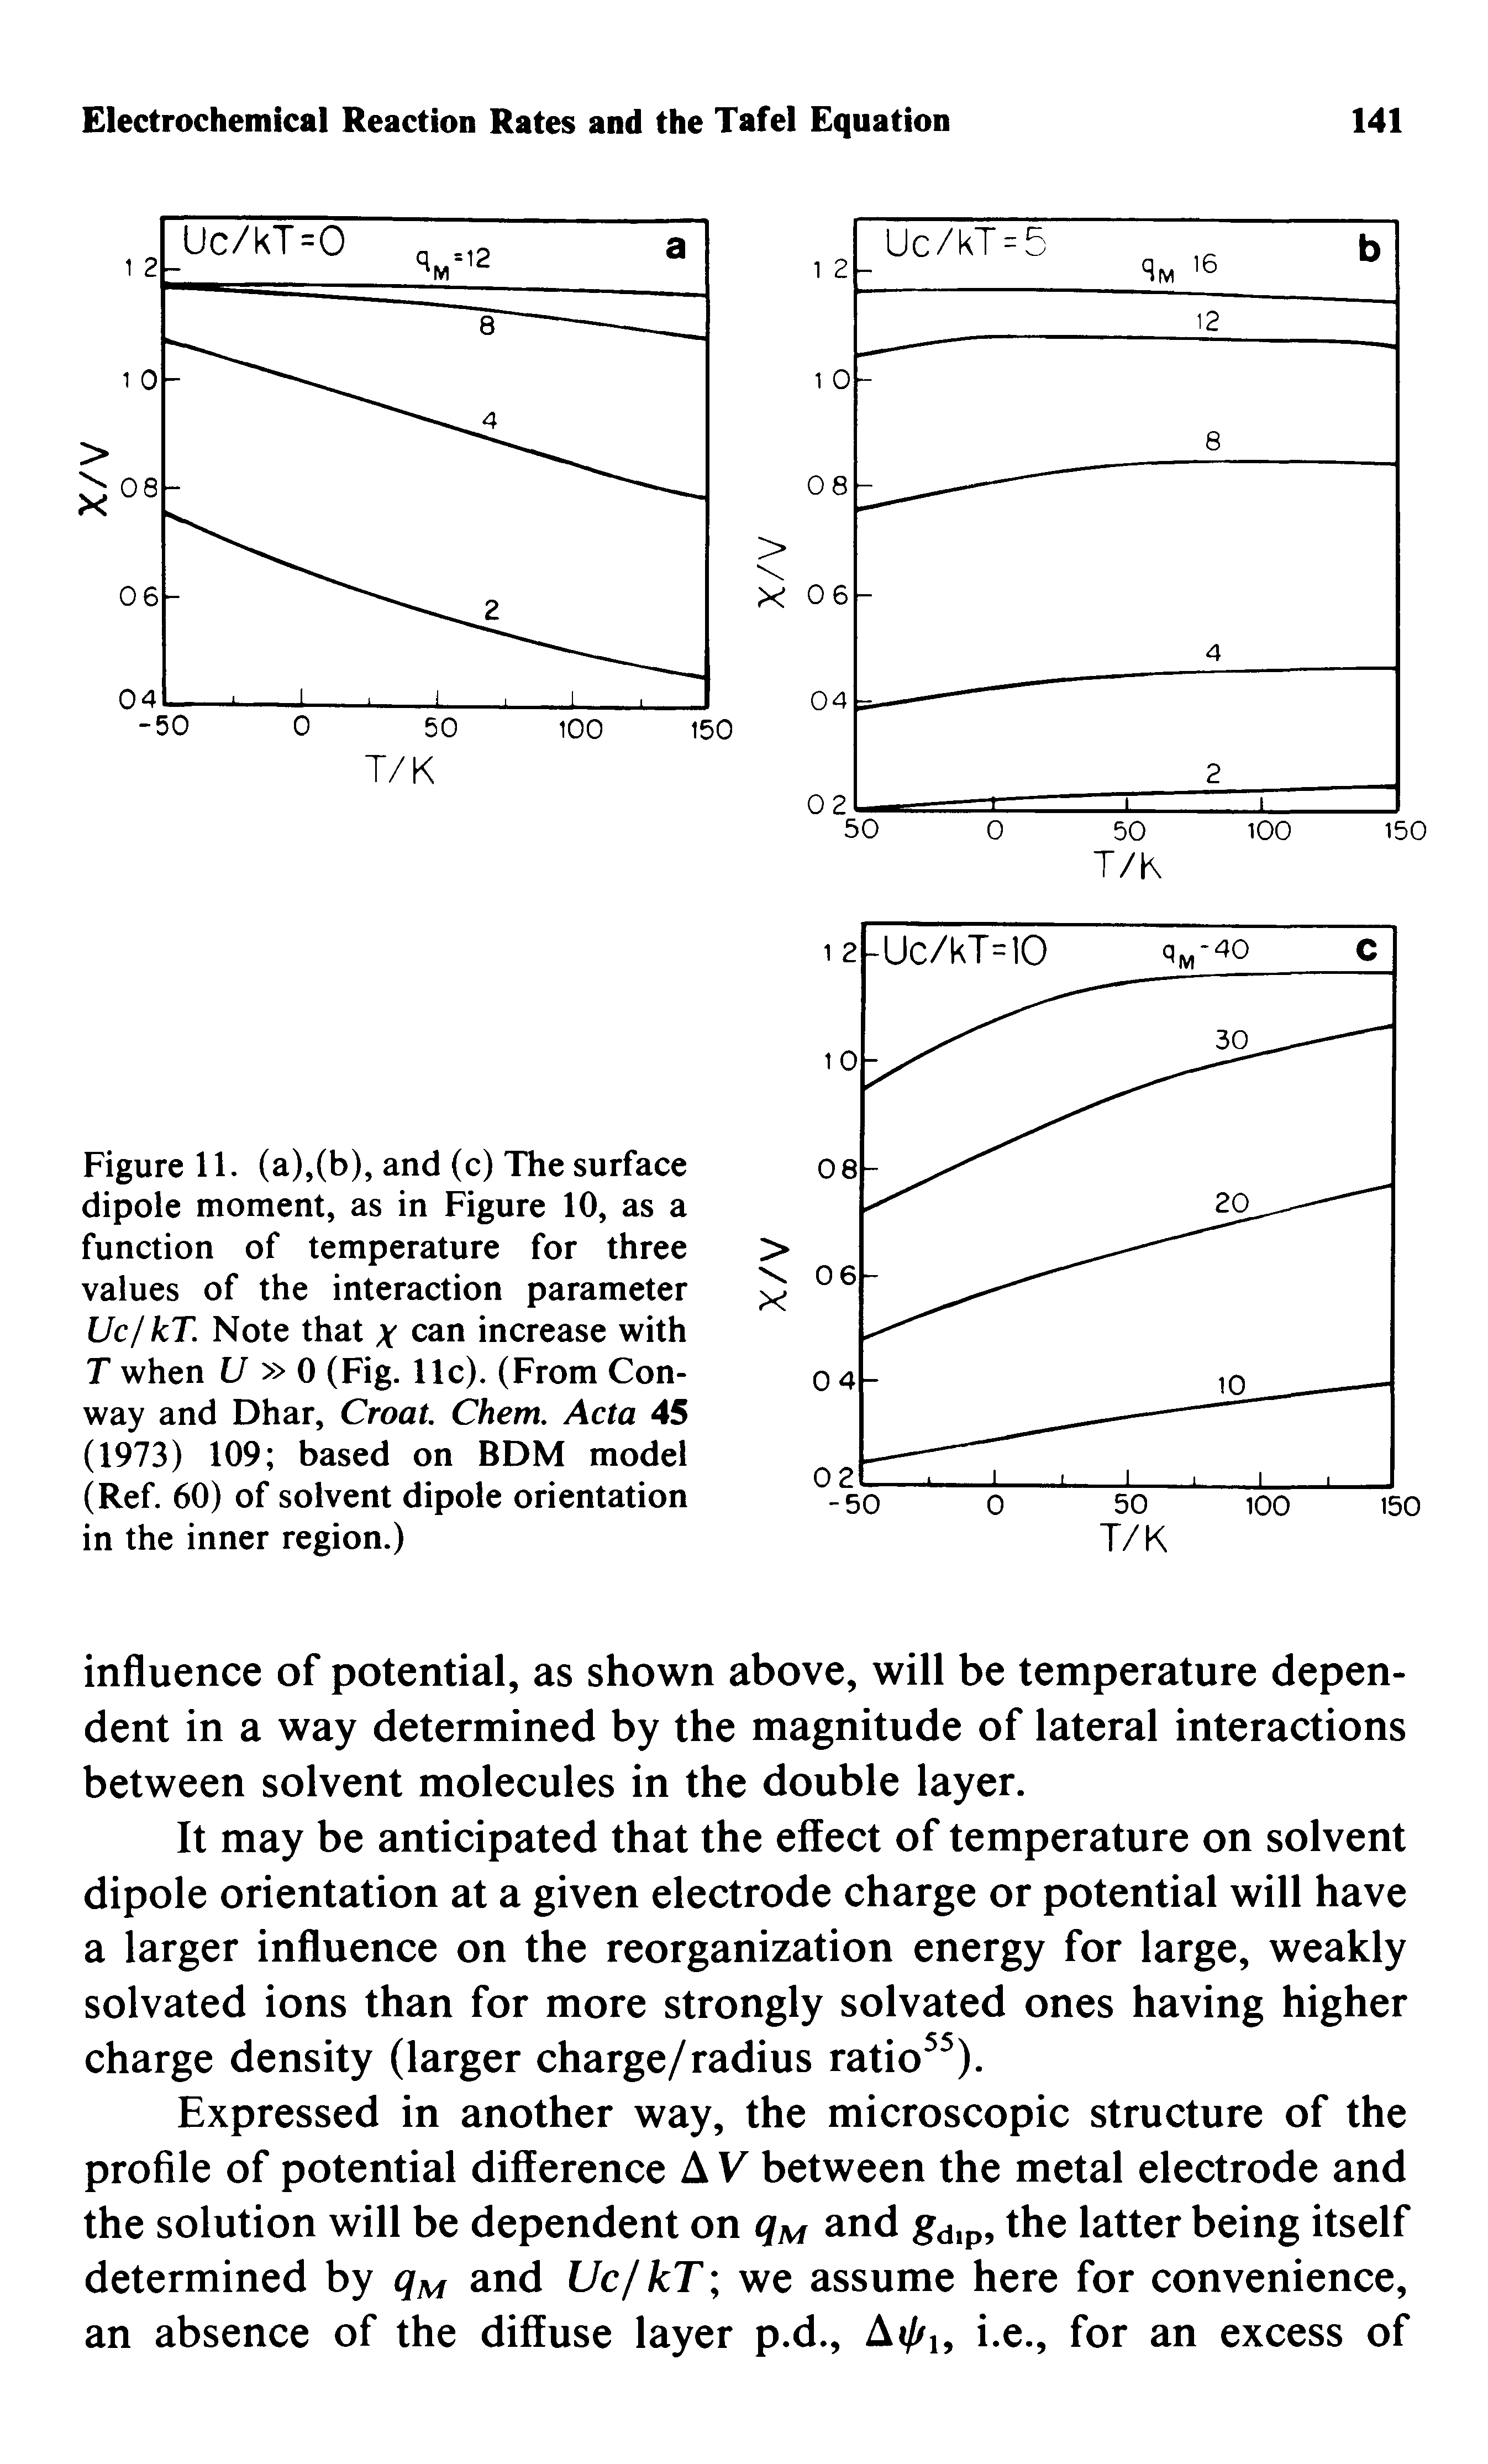 Figure 11. (a),(b), and (c) The surface dipole moment, as in Figure 10, as a function of temperature for three values of the interaction parameter Uc/kT. Note that x can increase with T when U 0 (Fig. 11c). (From Conway and Dhar, Croat. Chem. Acta 45 (1973) 109 based on BDM model (Ref, 60) of solvent dipole orientation in the inner region.)...